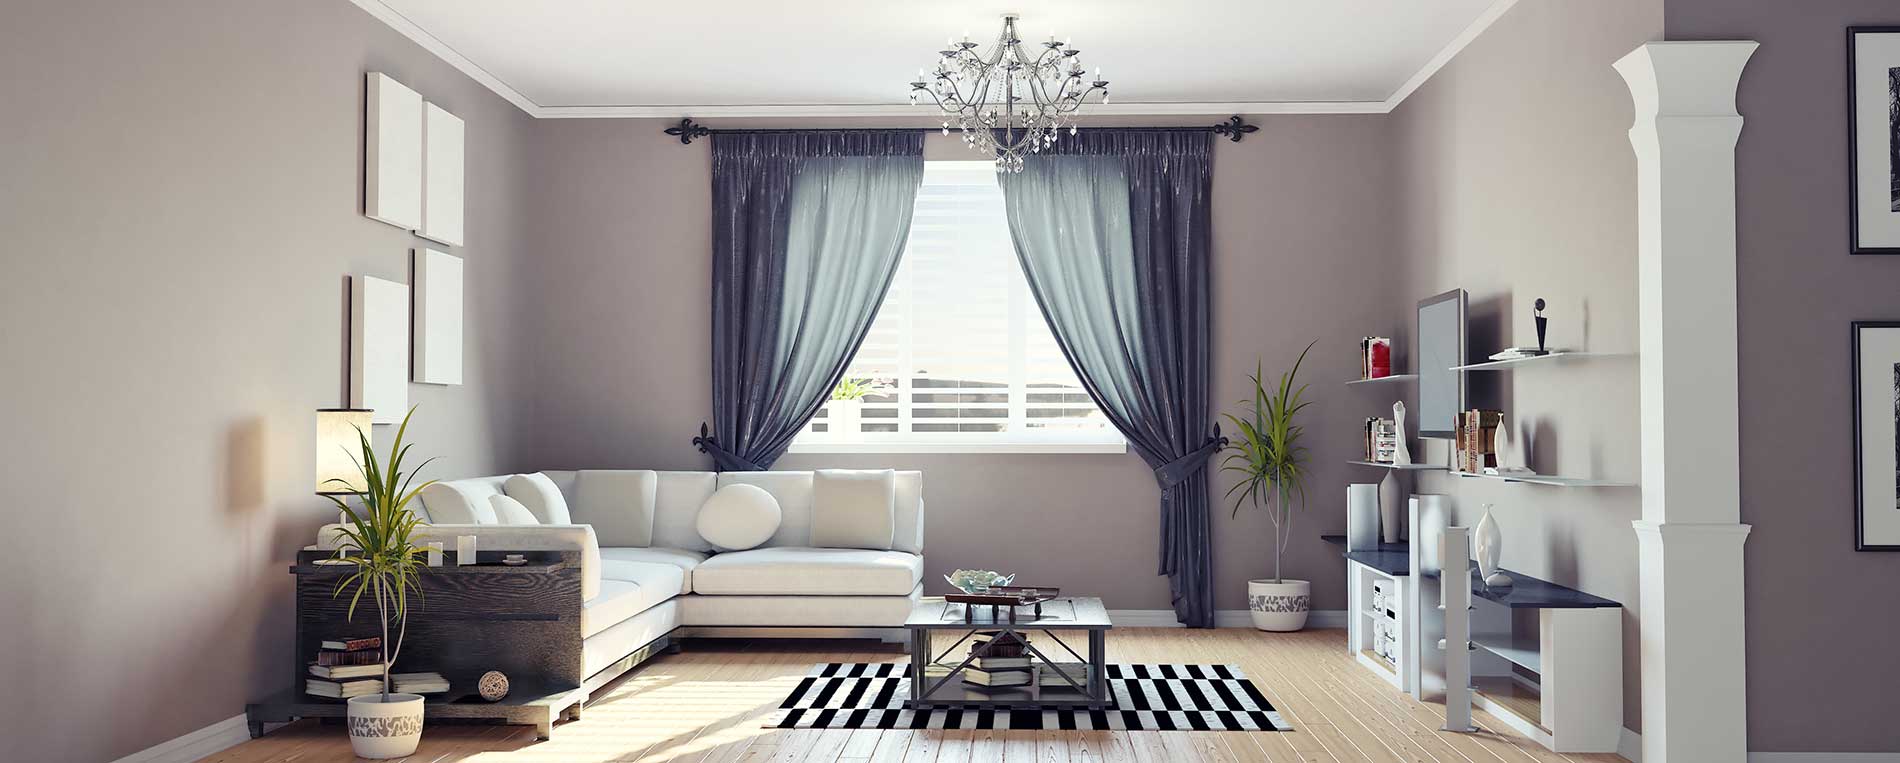 Blinds vs. Shades: What’s The Difference?